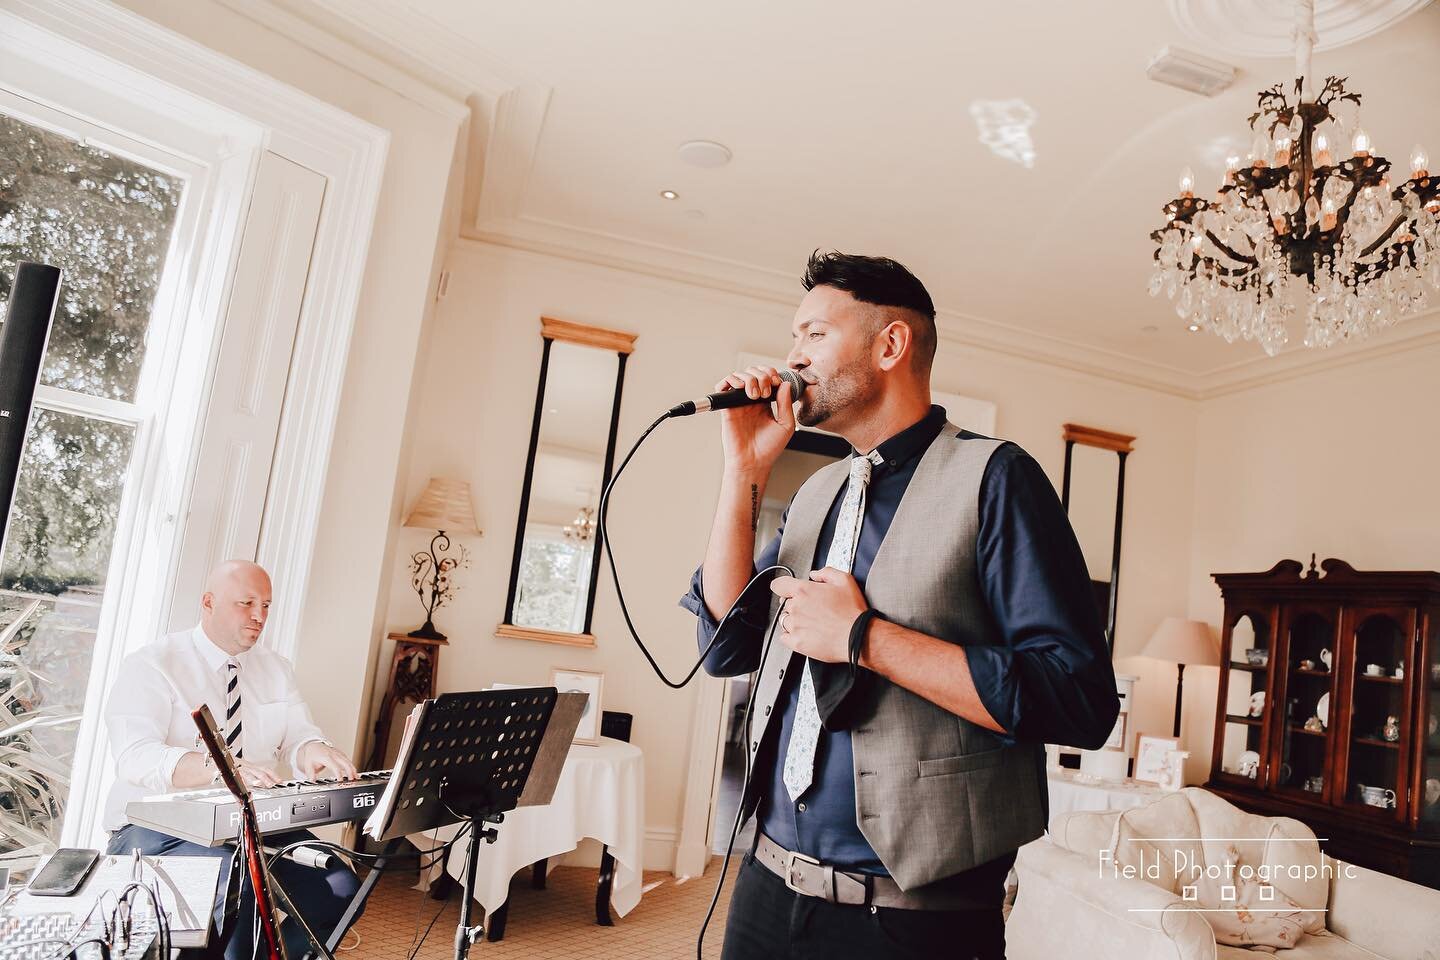 Performing at the beautiful @shottlehall - thank you @fieldphotographicmatt for these great photos. Check out his insta for more! #weddingparty #jakeandianband #celebration #bride #groom #bridesmaids #happy #happiness #unforgettable #love #forever #w